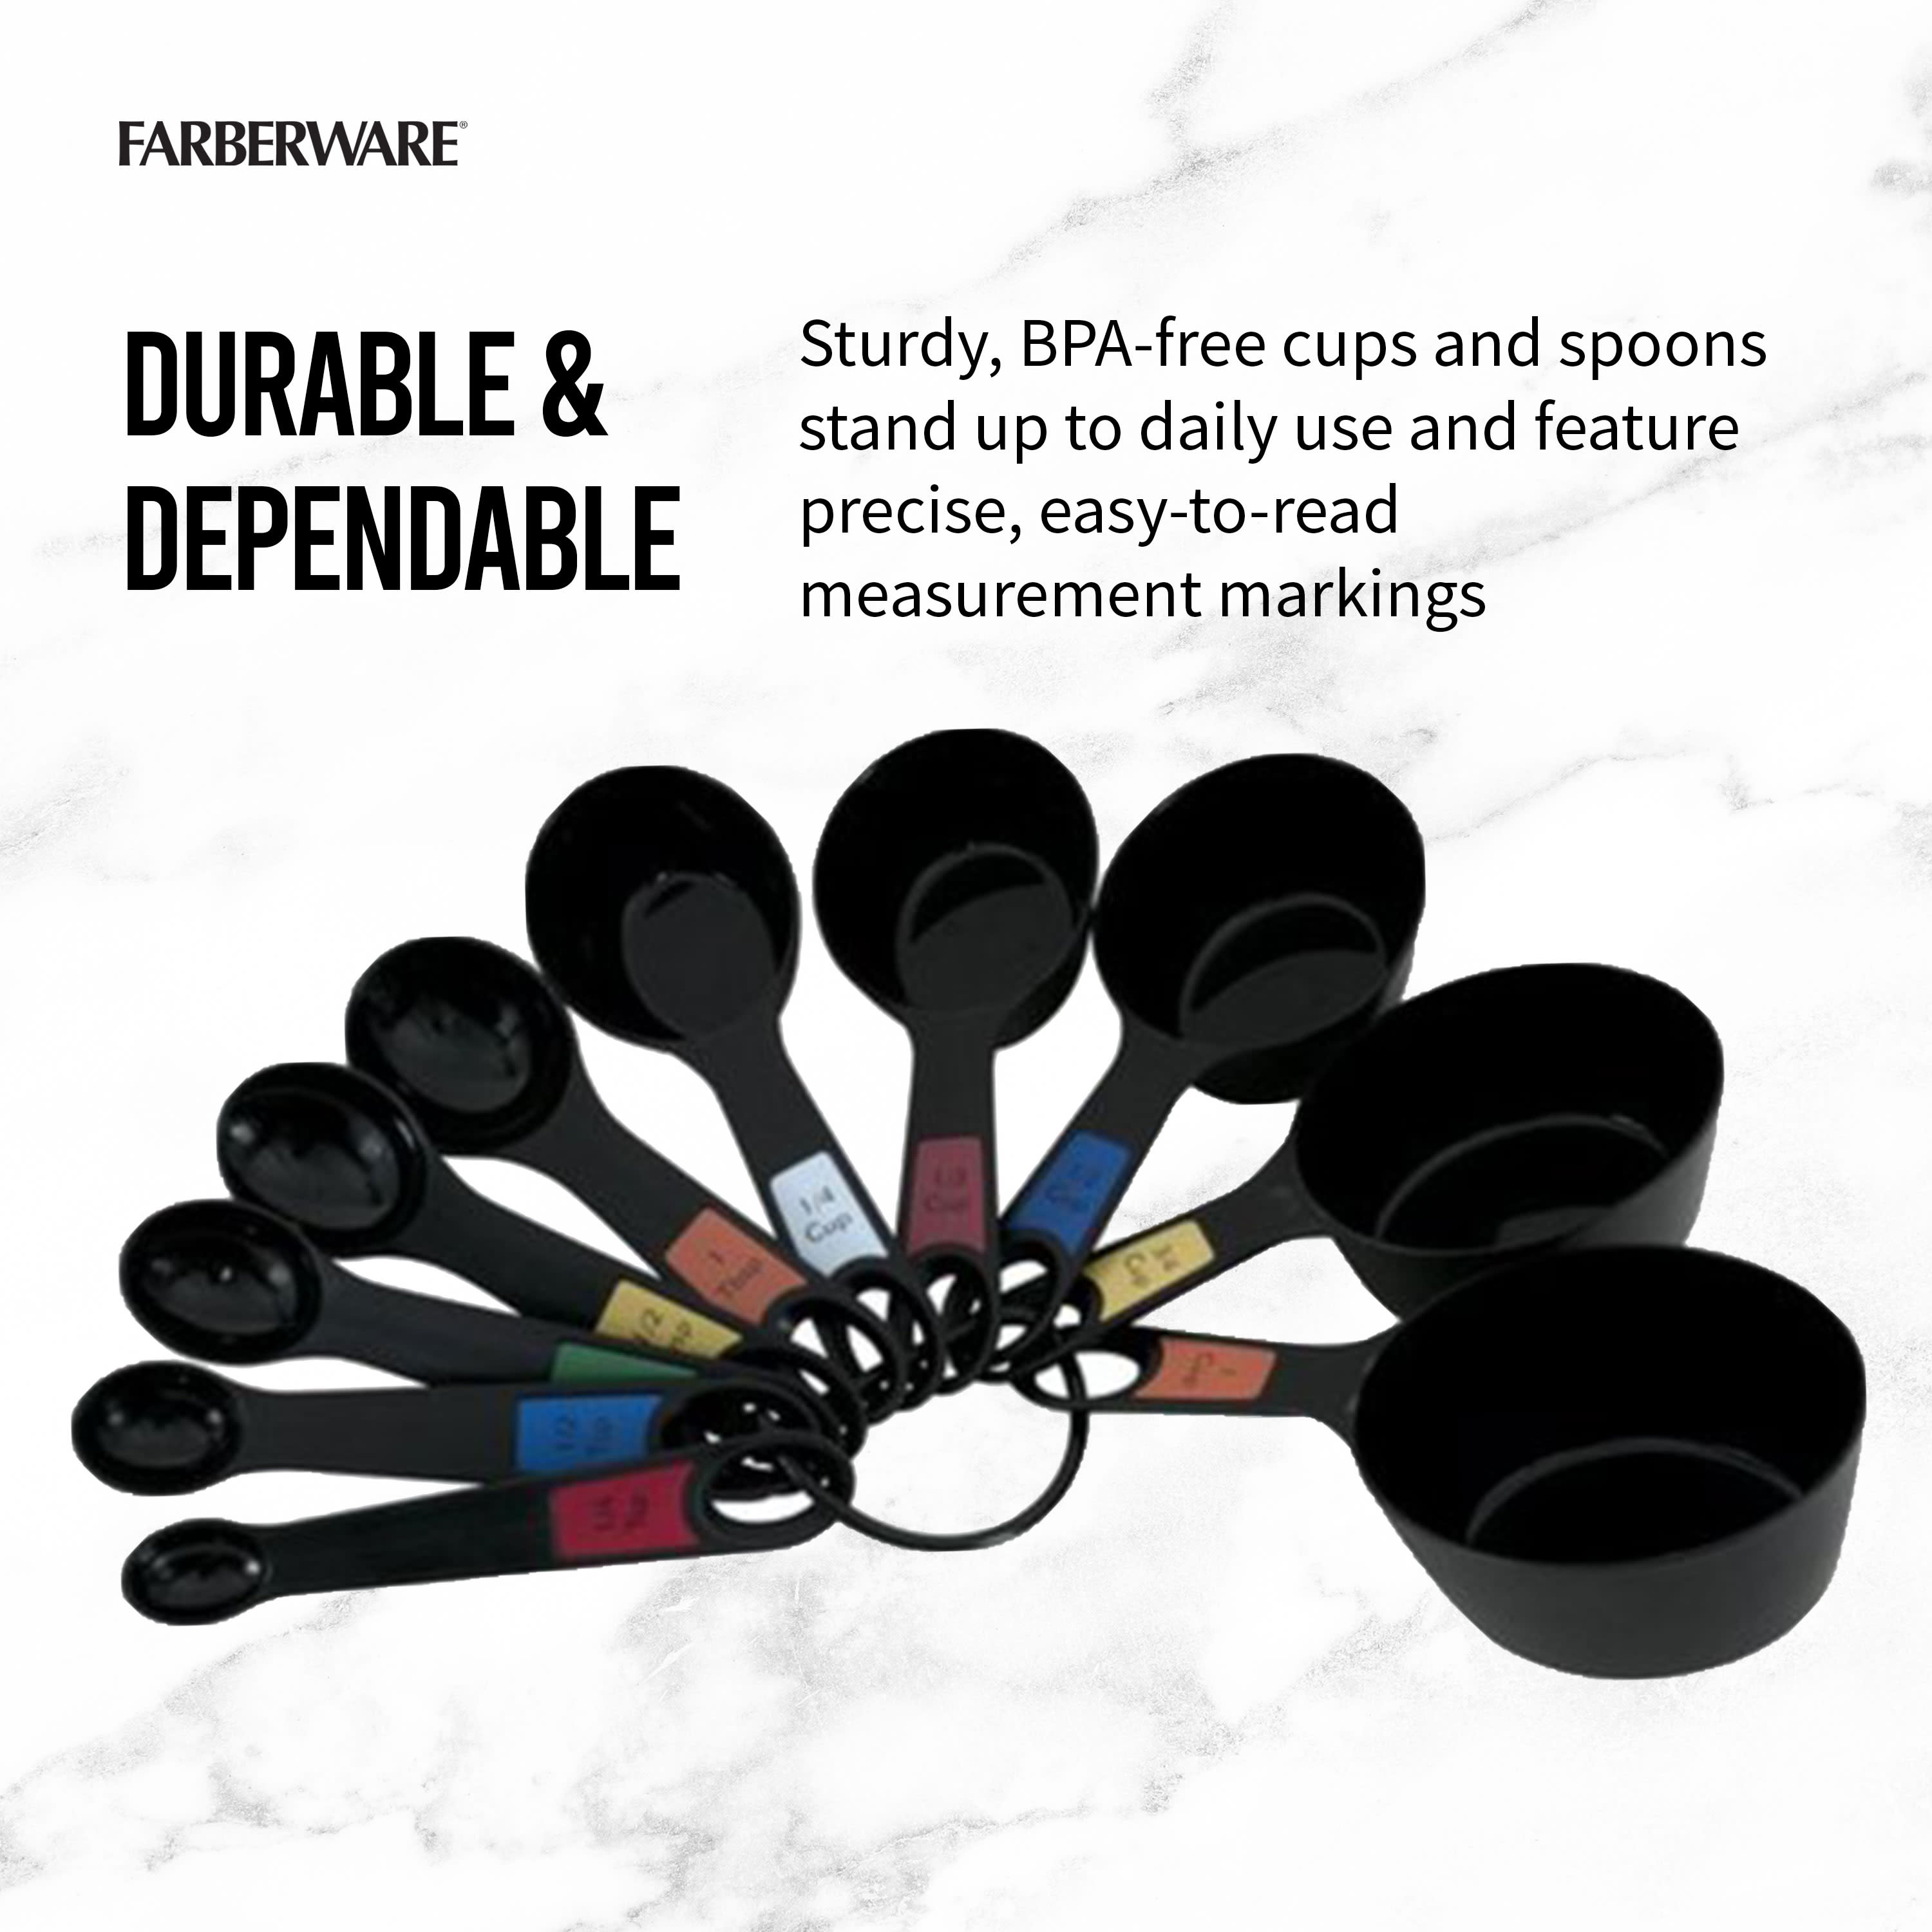 Farberware Professional 10 Piece Plastic Measuring Cup and Spoon Set Black - image 3 of 12